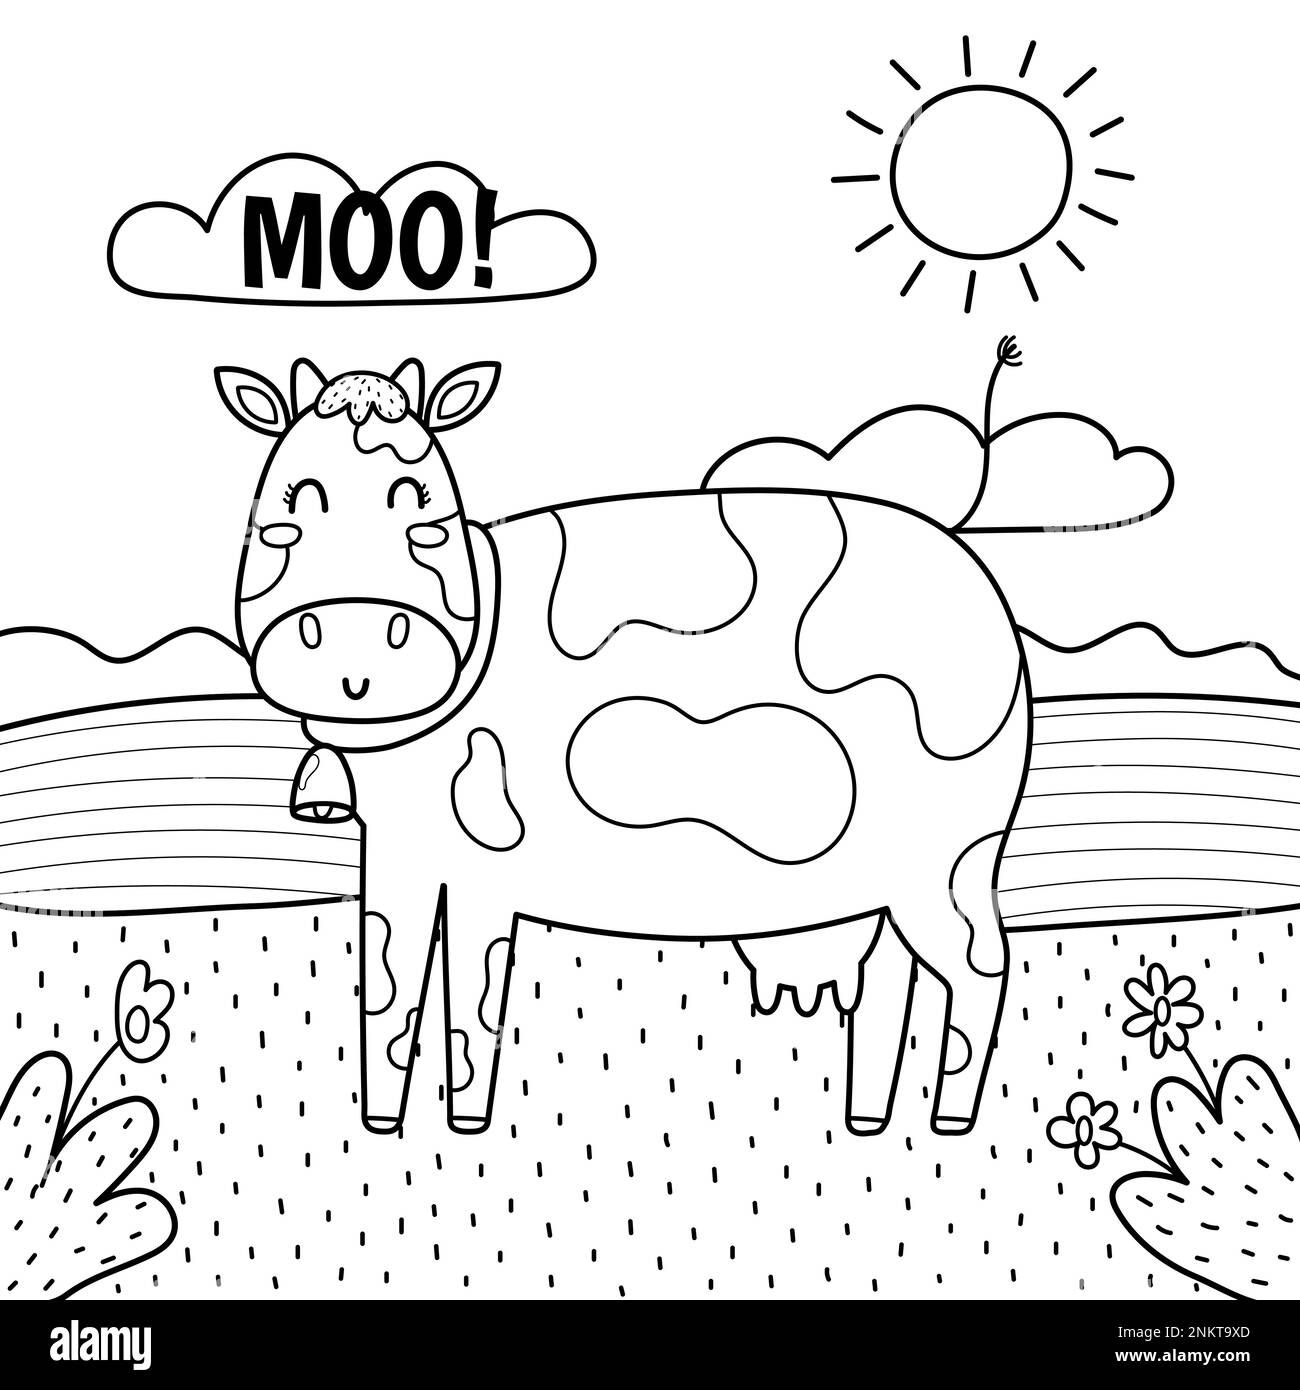 The cow goes moo black and white print. Coloring page with cute farm character Stock Vector